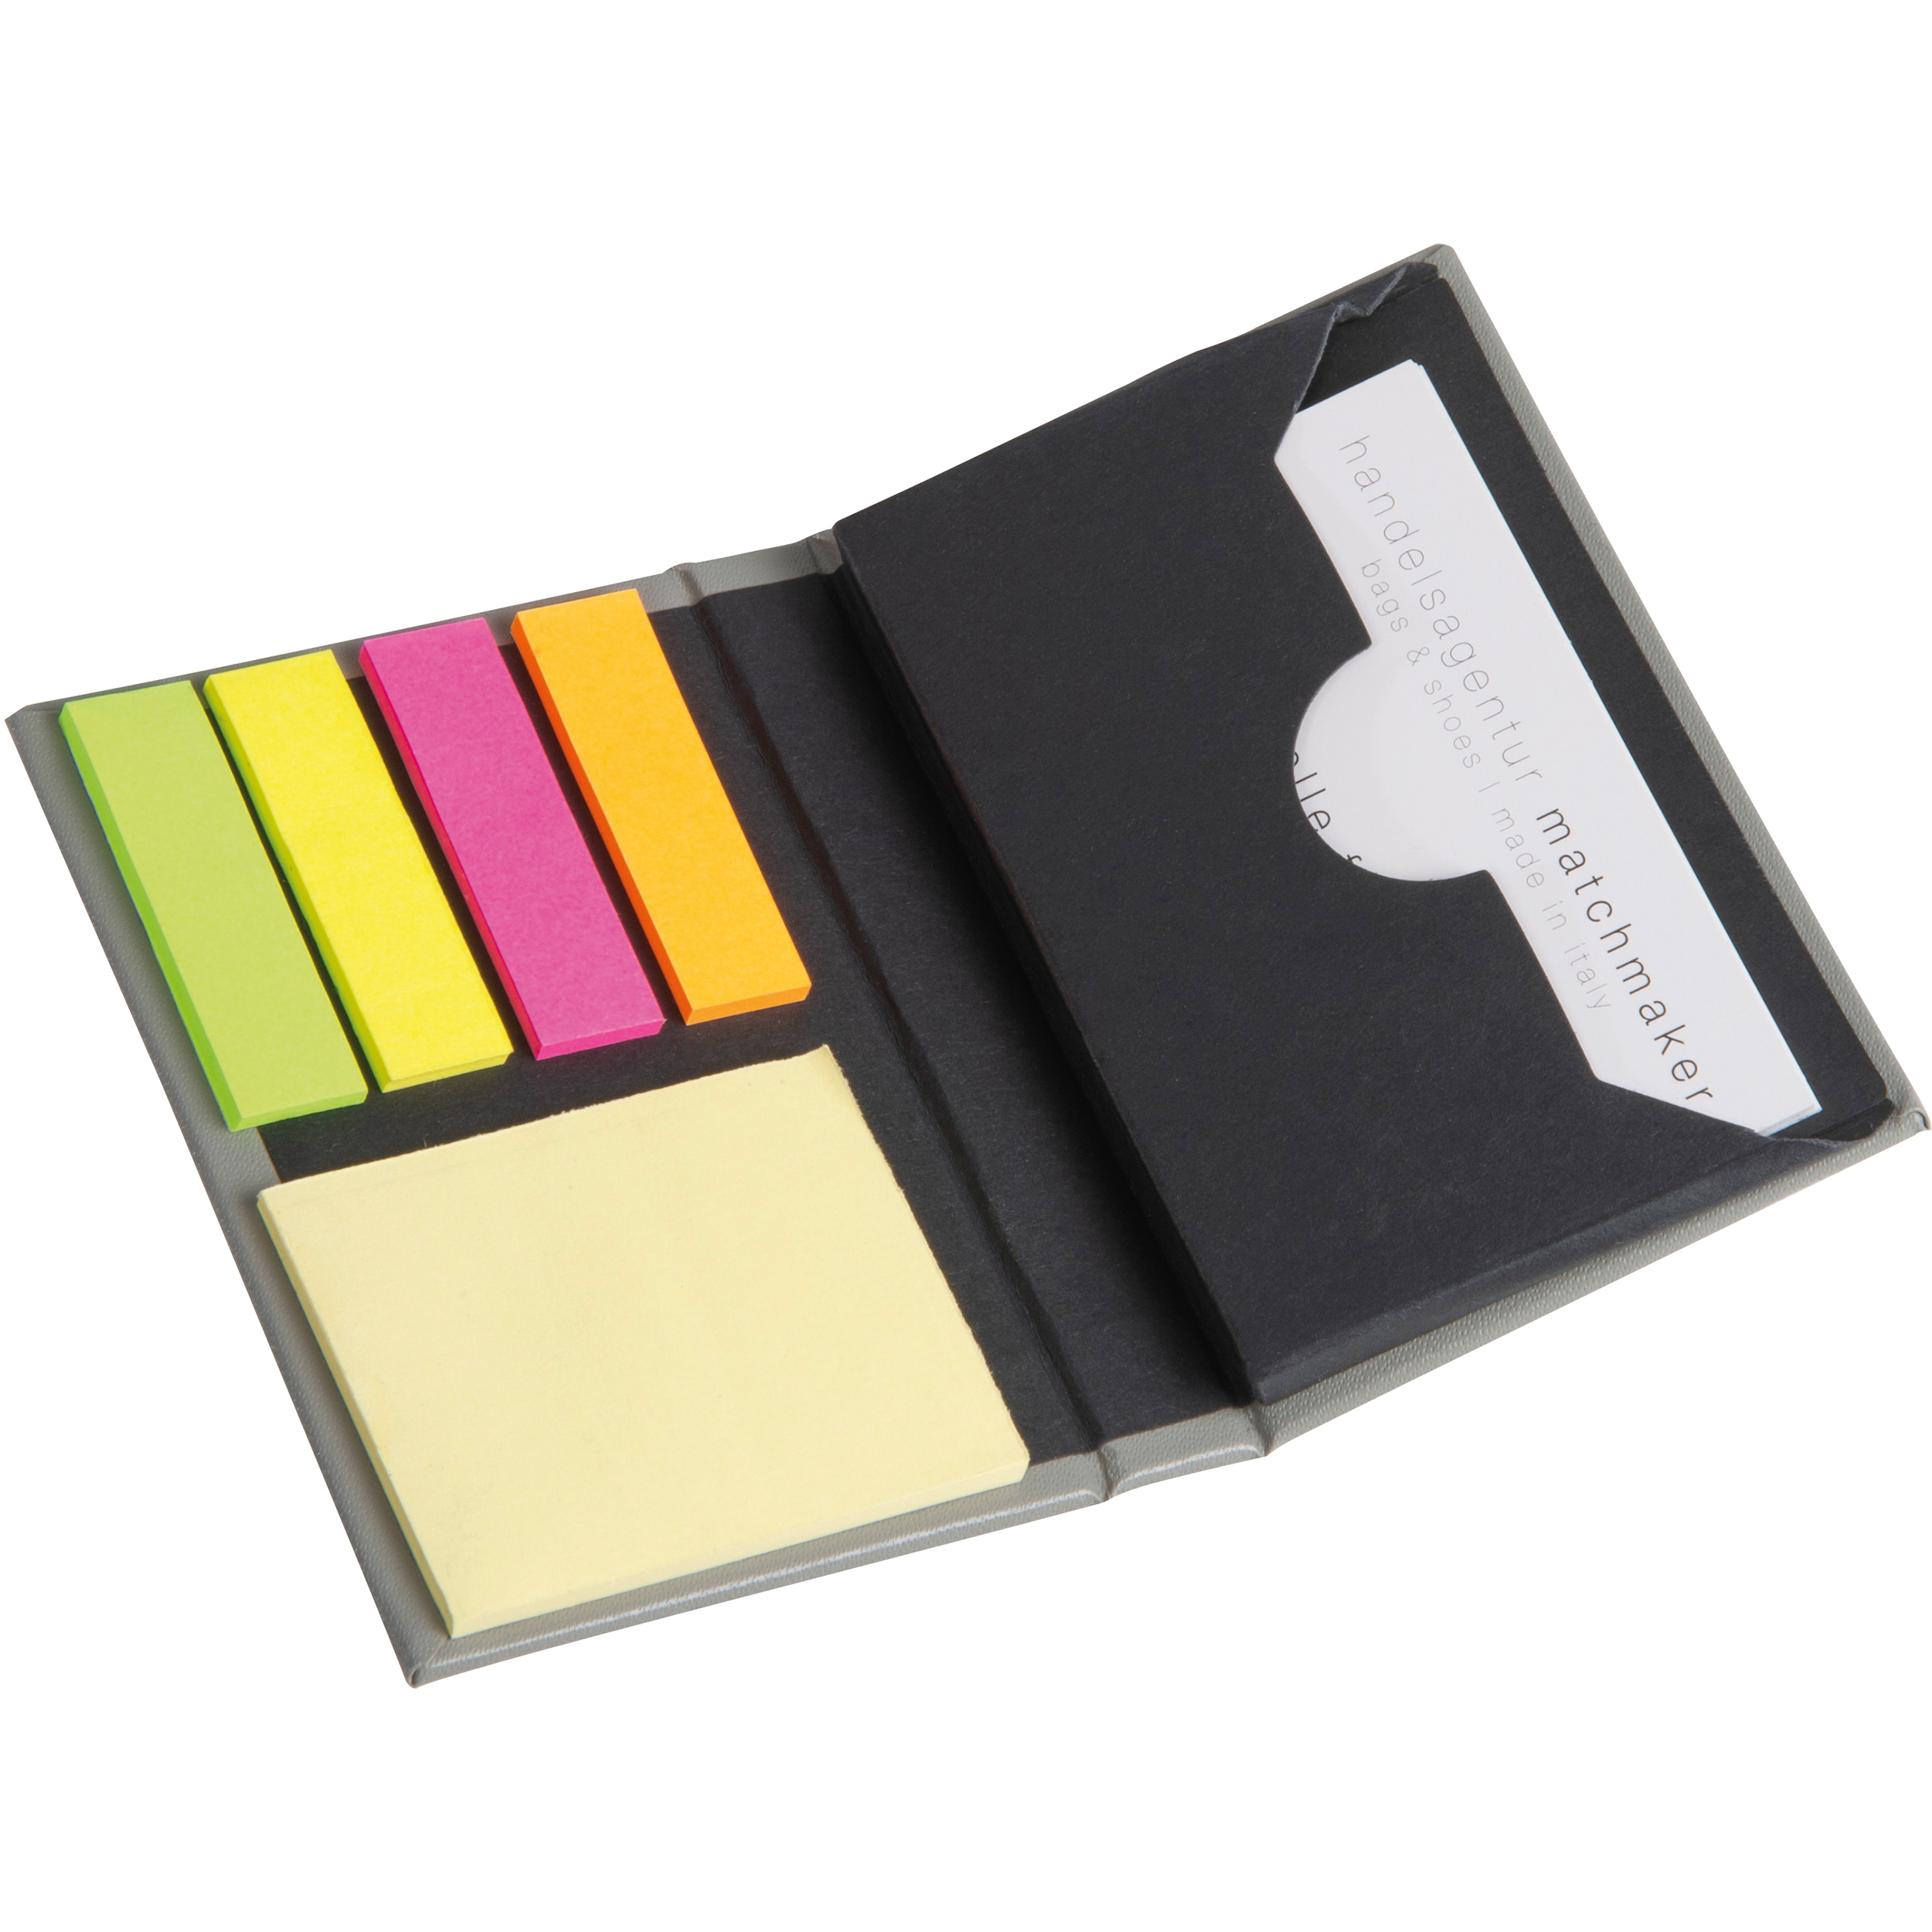 Business card case with sticky notes